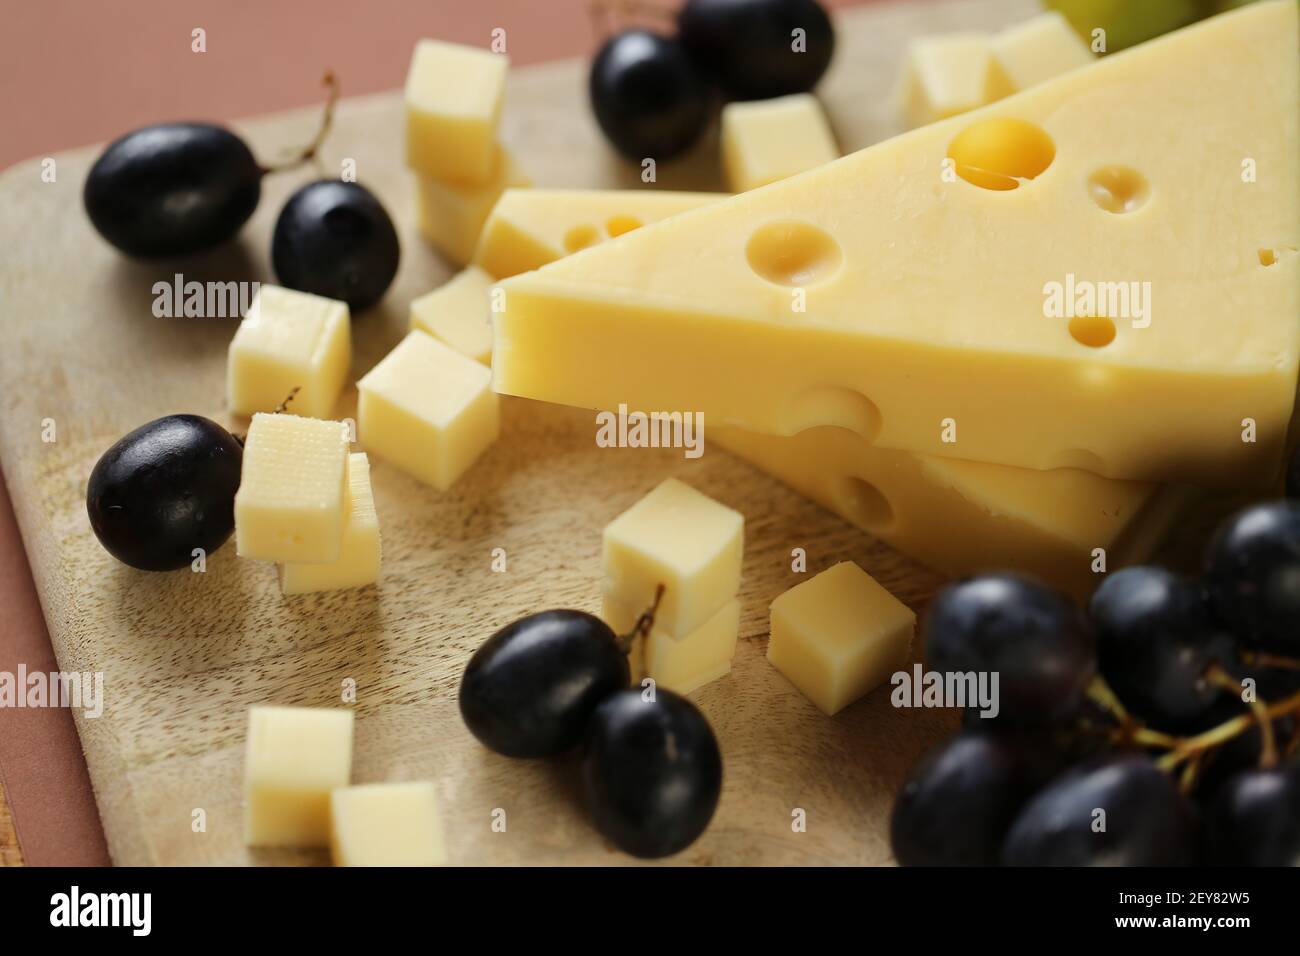 maasdamer cheese. Piece of cheese maasdam or maasdamer on wooden board on brown background.Hard cheeses. Dairy products.Healthy and tasty snack Stock Photo